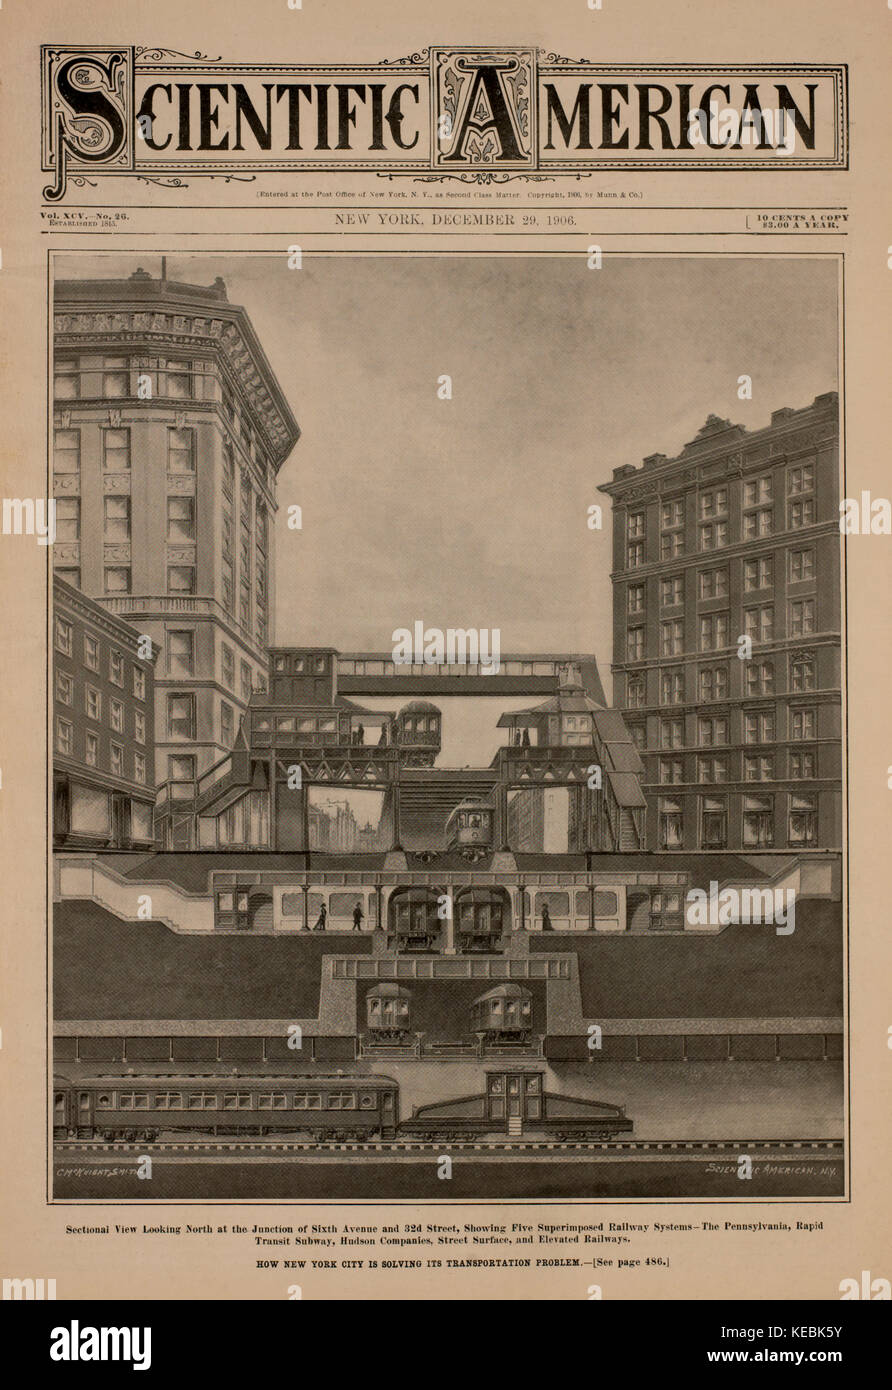 Sectional View looking North at the Junction of Sixth Avenue and 32nd Street, Showing Five Superimposed Railway Systems, Scientific American, December 29, 1906 Stock Photo